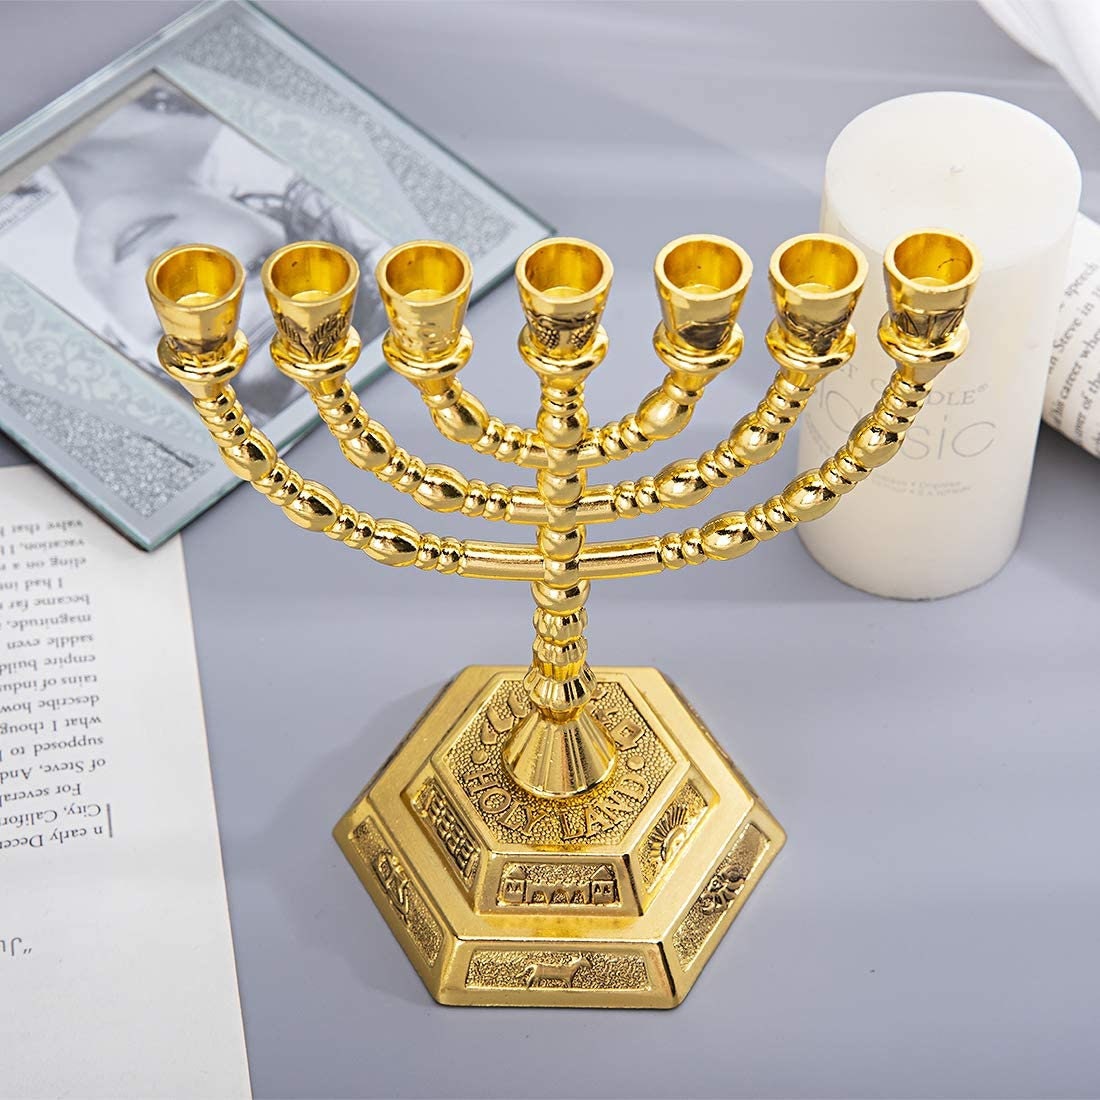 Temple Menorah (5 INCHES tall)- GOLD PLATED on Hexagon Base Featuring the Symbols of the 12 Tribes of Israel